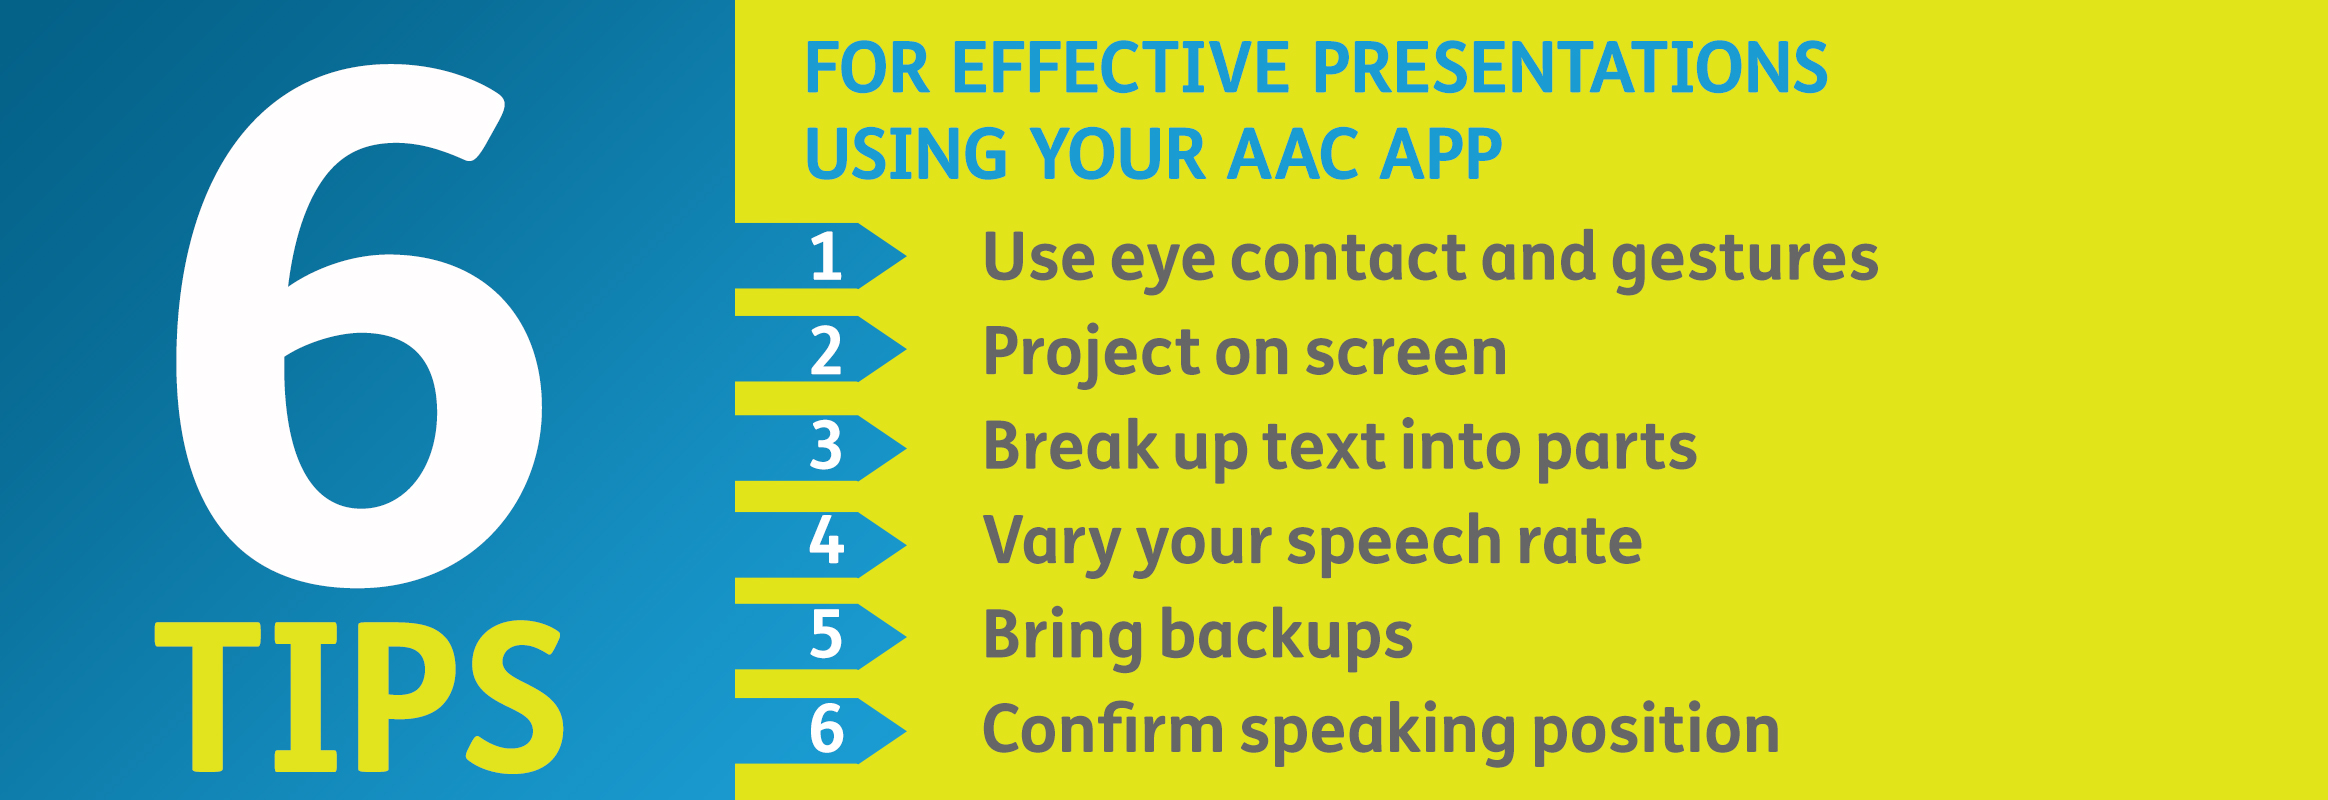 Top 6 tips for effective presentations using your AAC app